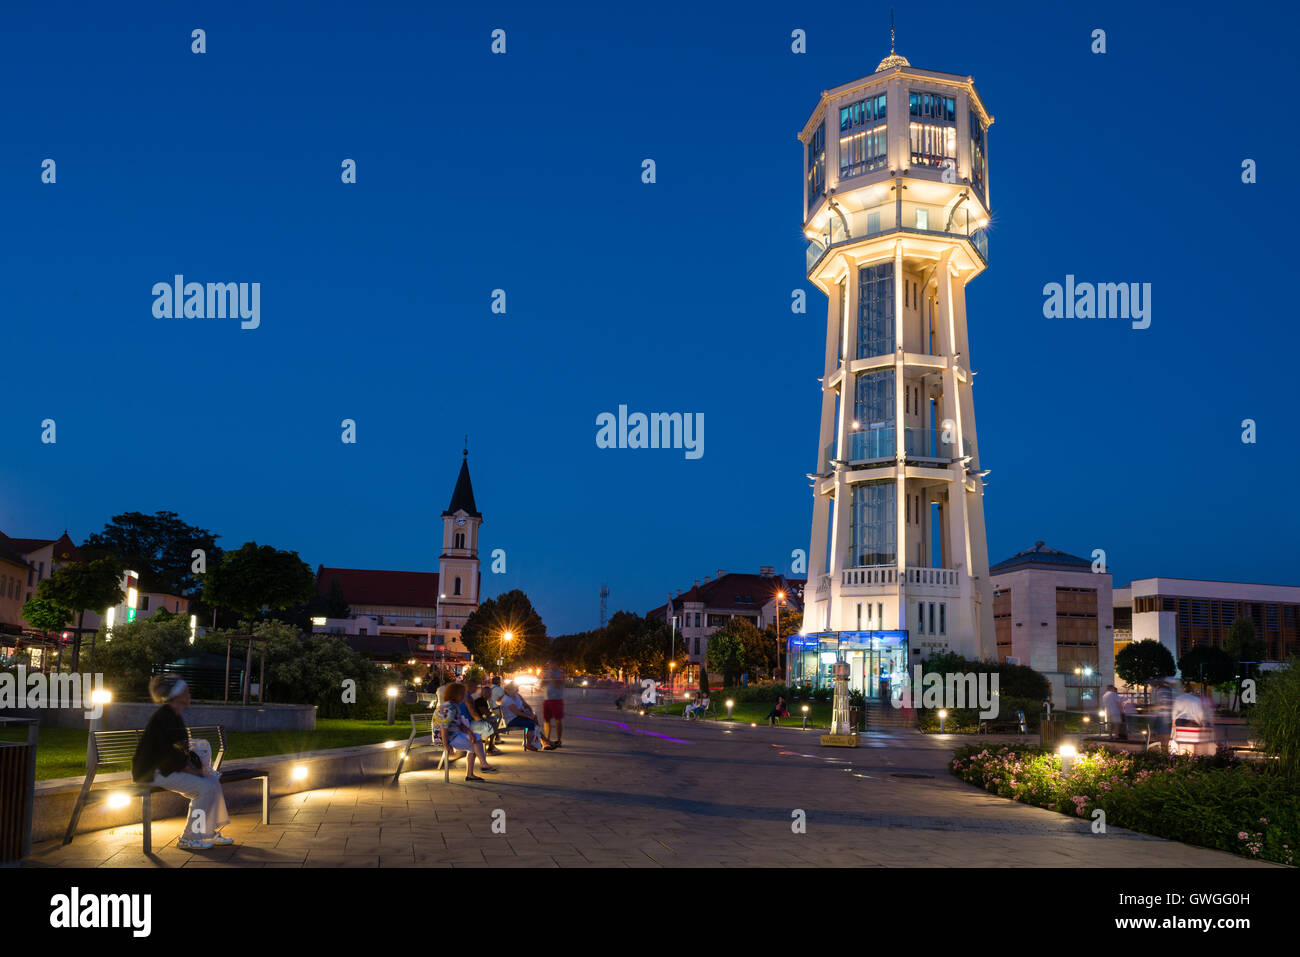 SIOFOK, HUNGARY - AUGUST 24, 2016: Old wooden water tower on main square of city Siofok with night illumination. Stock Photo